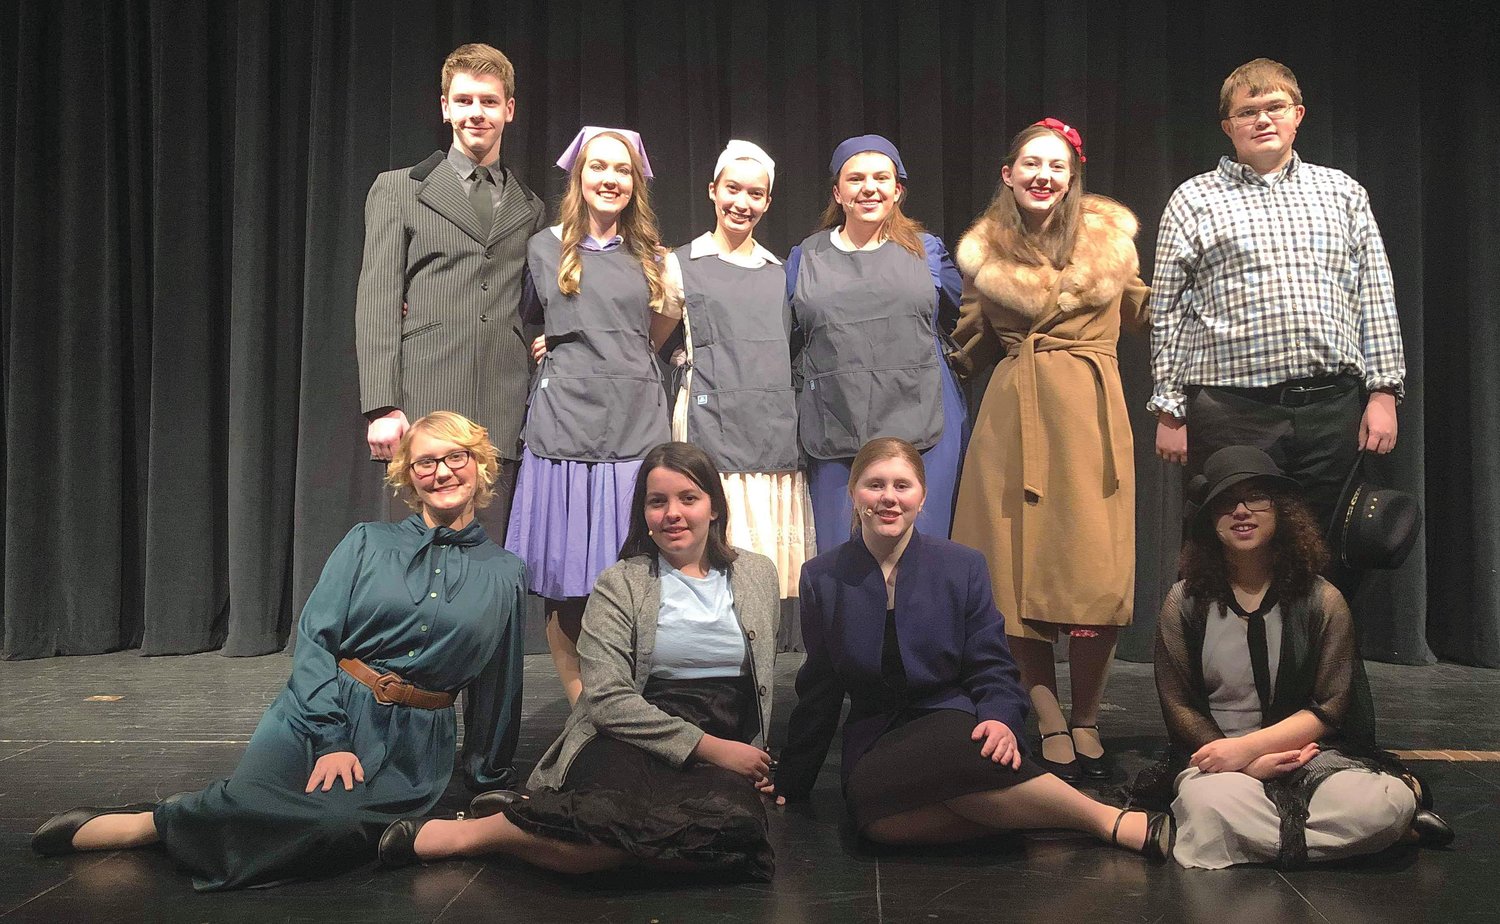 Crawfordsville High School students will perform Radium Girls at 7 p.m. today and Saturday in the high school auditorium.